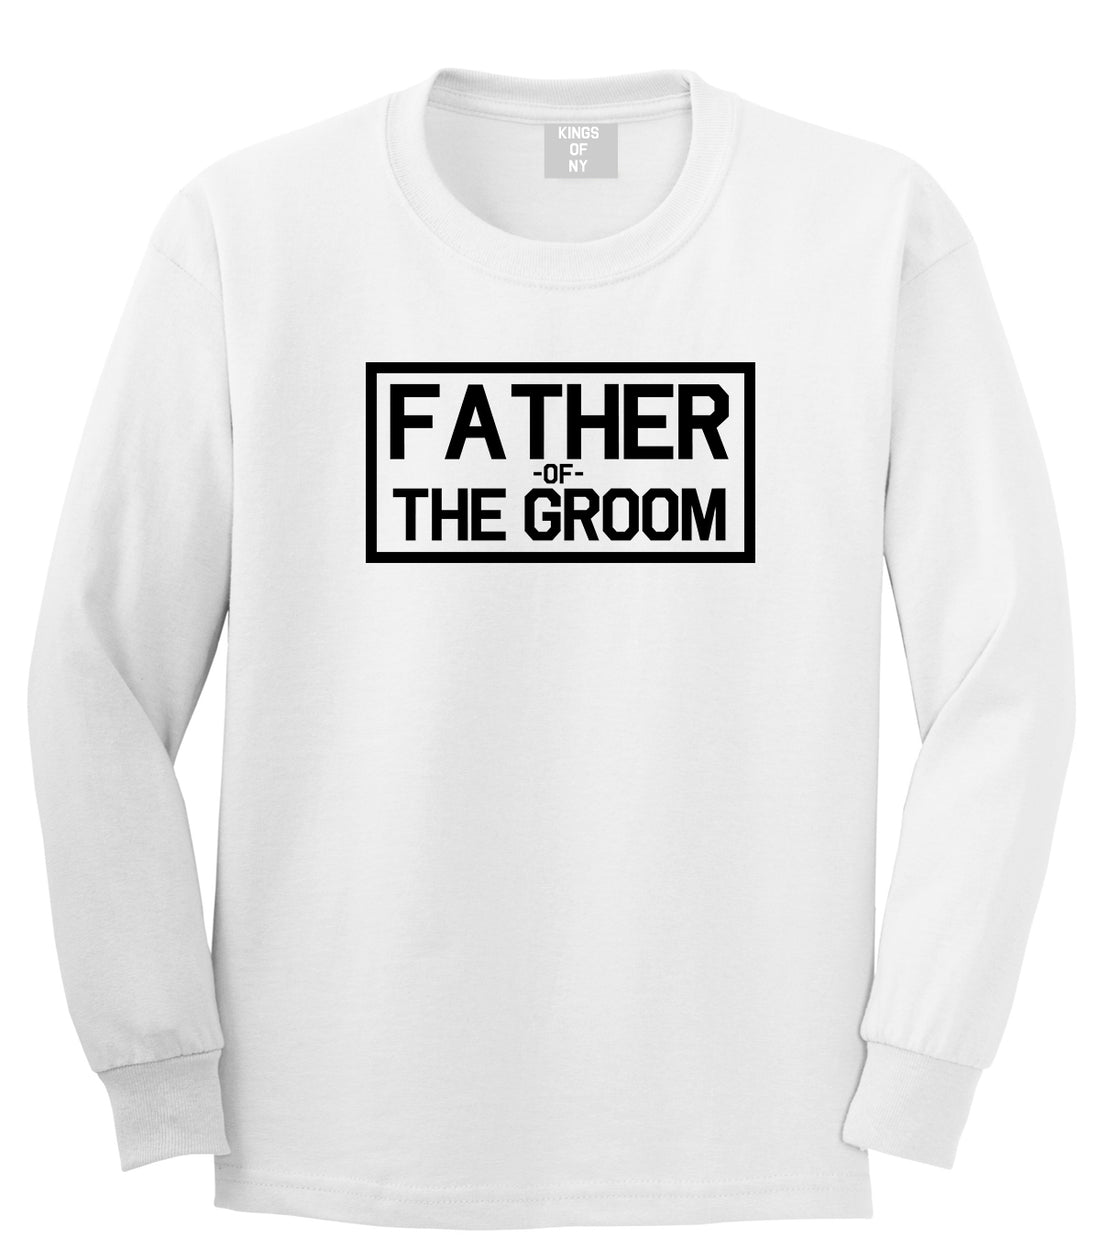 Father Of The Groom Mens White Long Sleeve T-Shirt by Kings Of NY